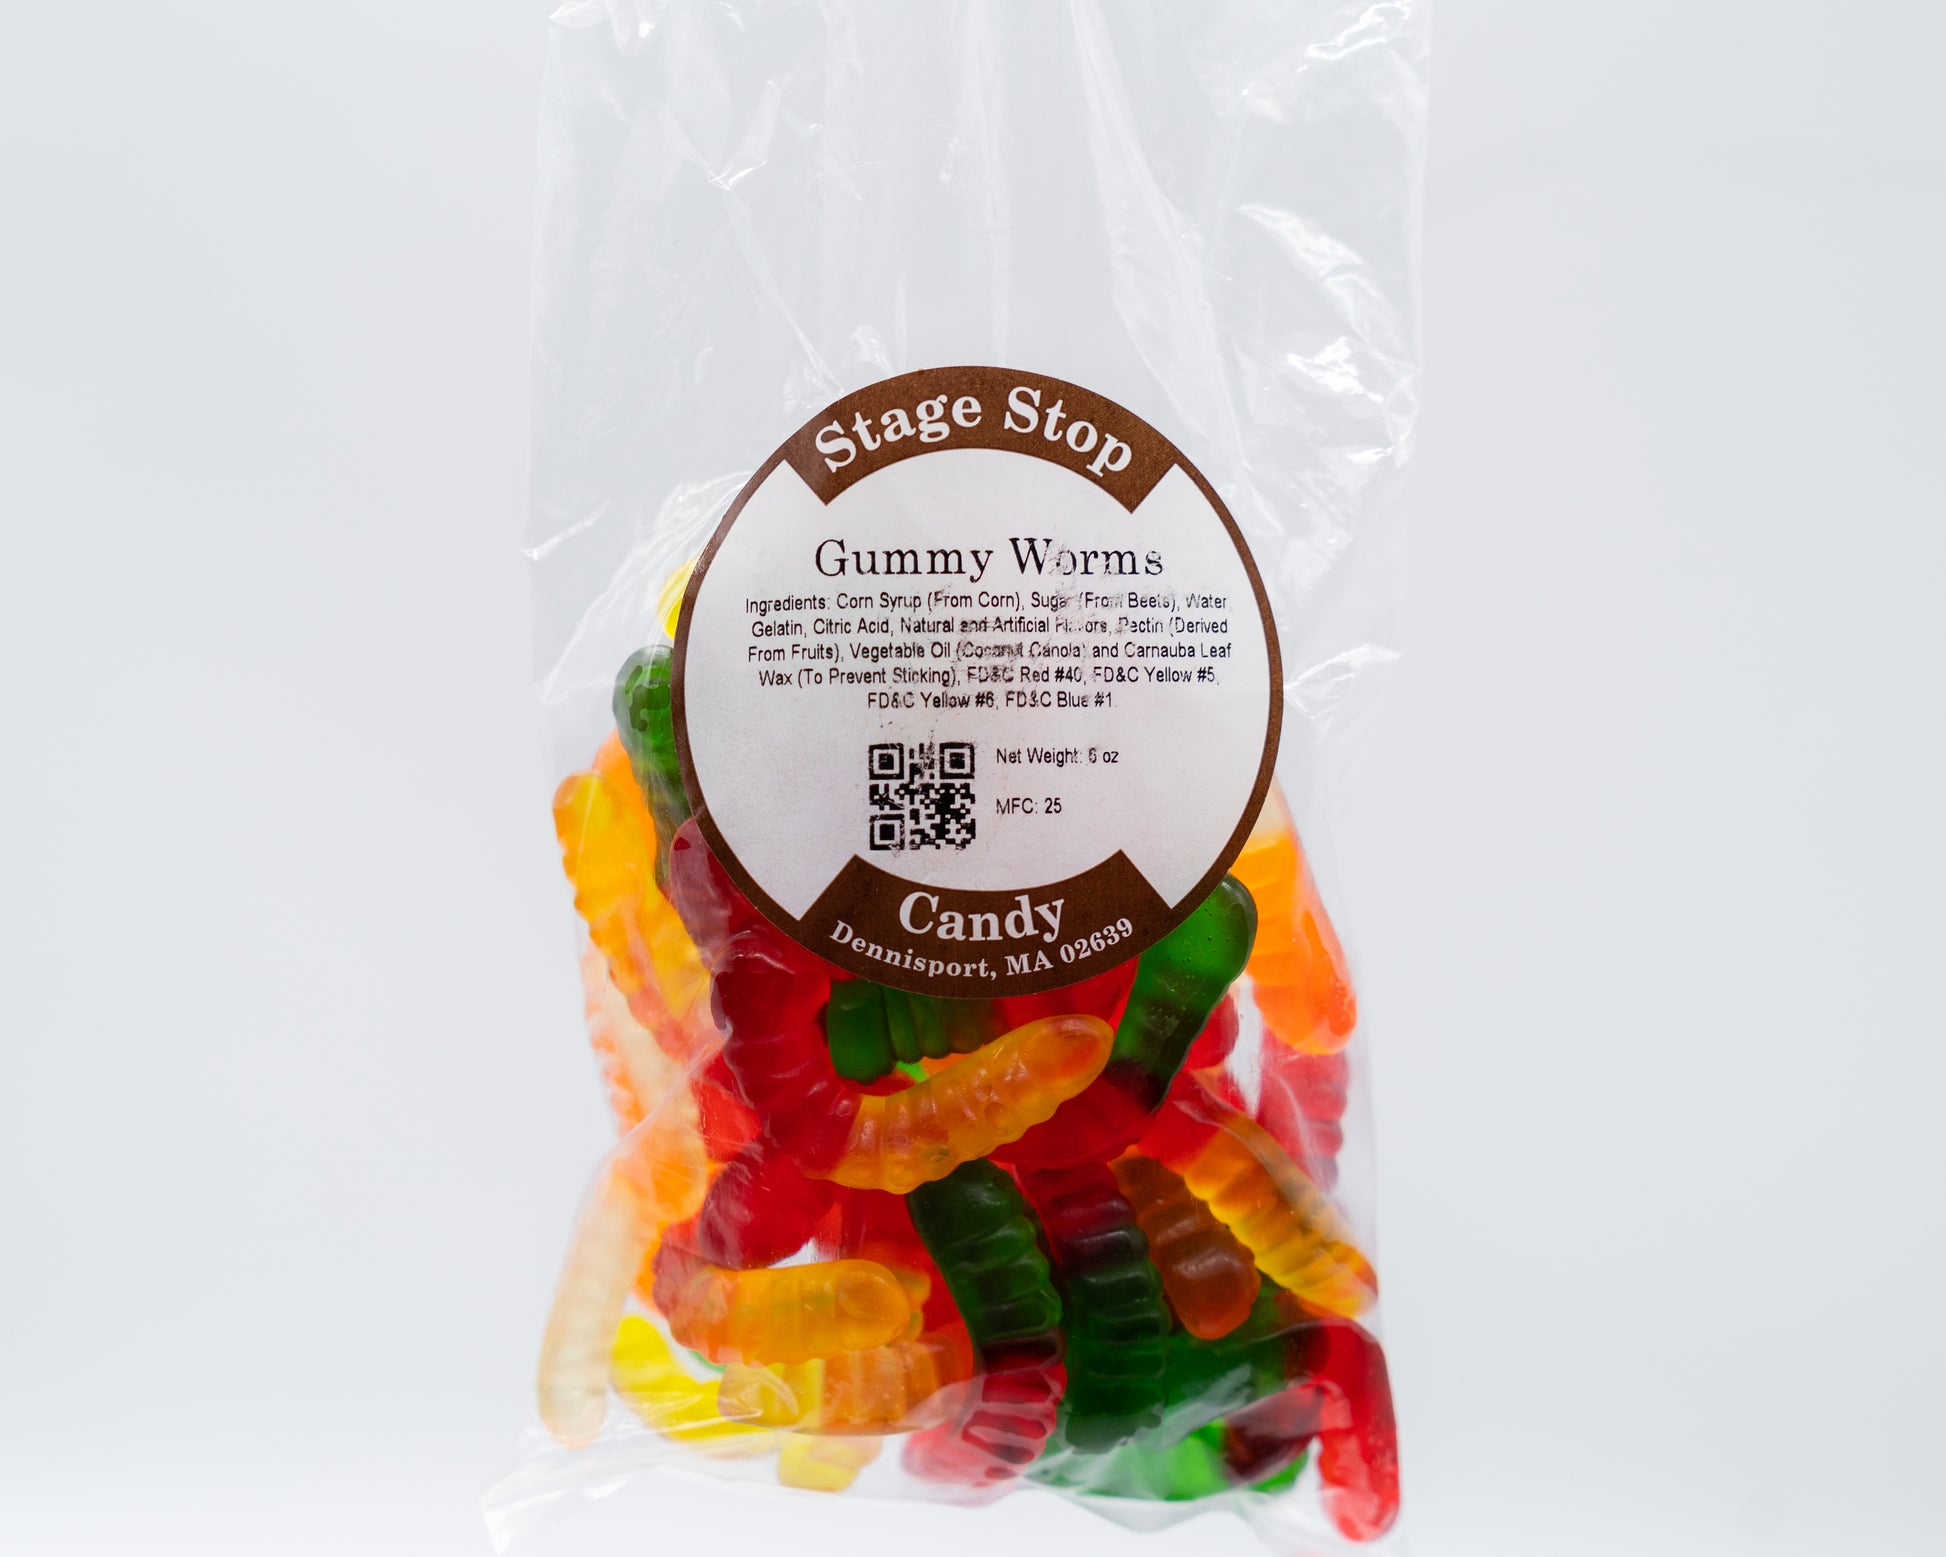 Bag of Gummy Works from Stage Stop Candy 